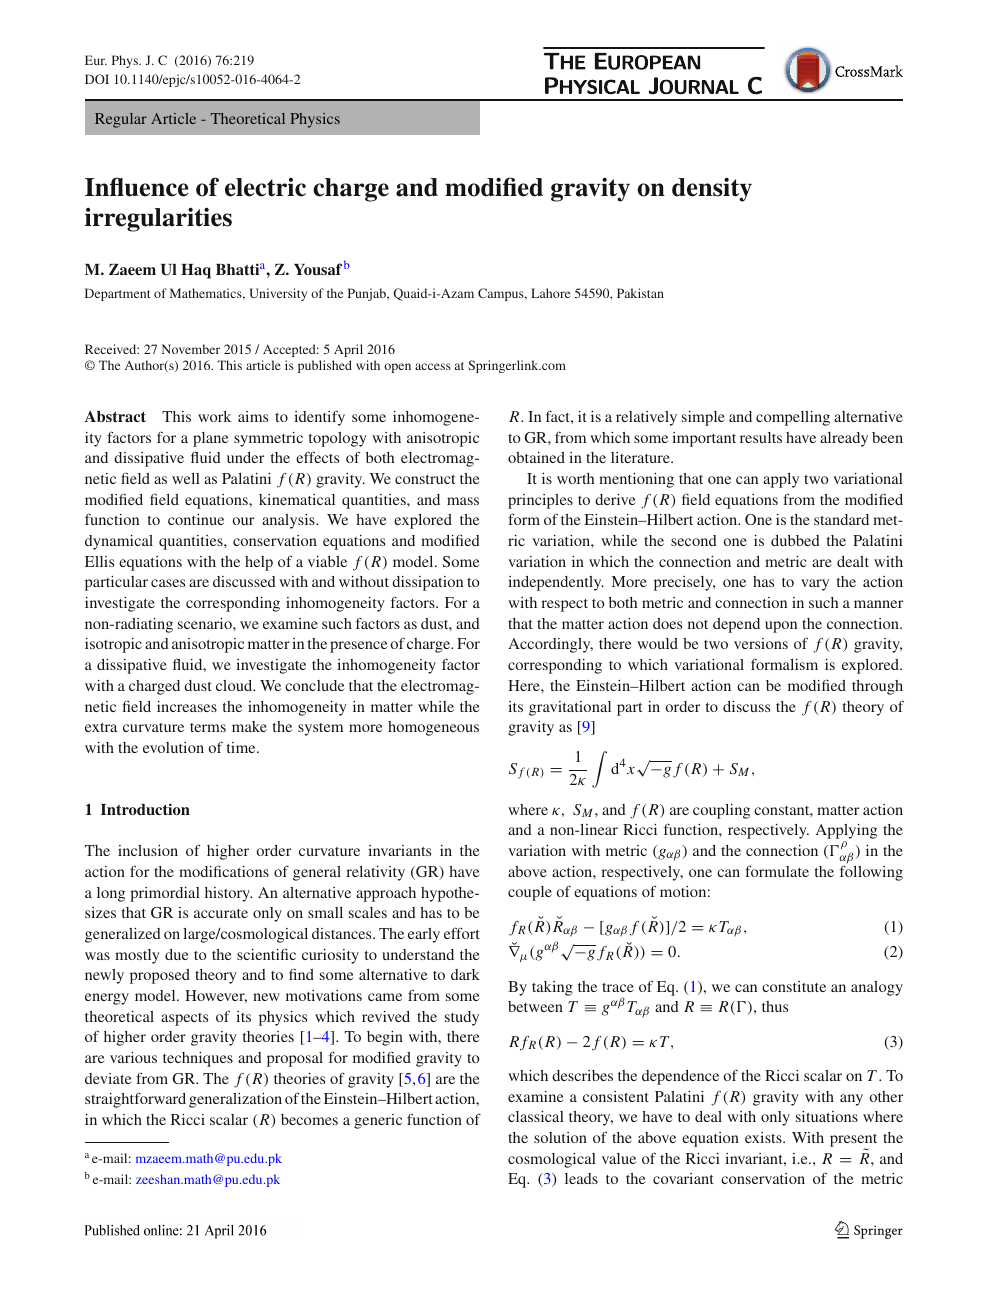 Influence Of Electric Charge And Modified Gravity On Density Irregularities Topic Of Research Paper In Physical Sciences Download Scholarly Article Pdf And Read For Free On Cyberleninka Open Science Hub